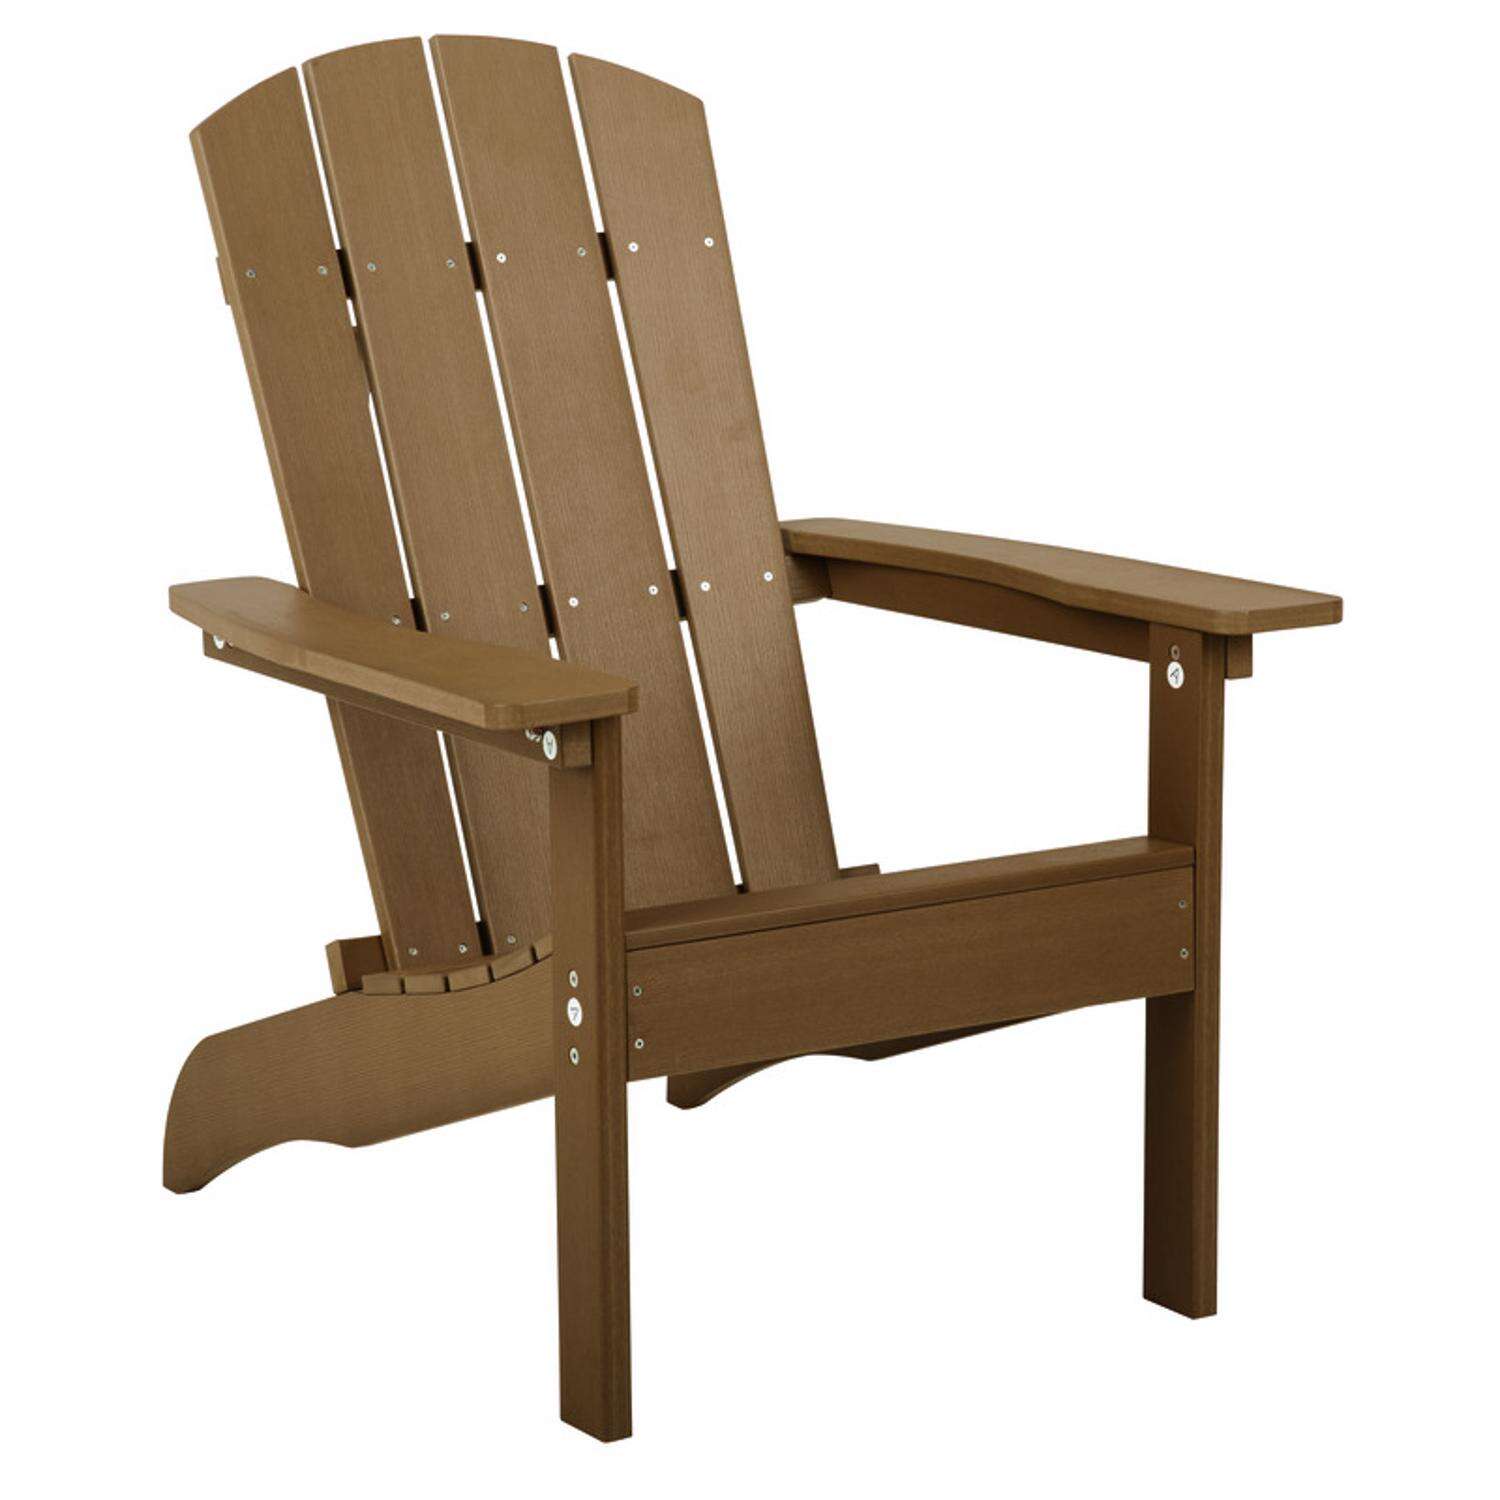 Living Accents Sand Resin Frame Adirondack Chair